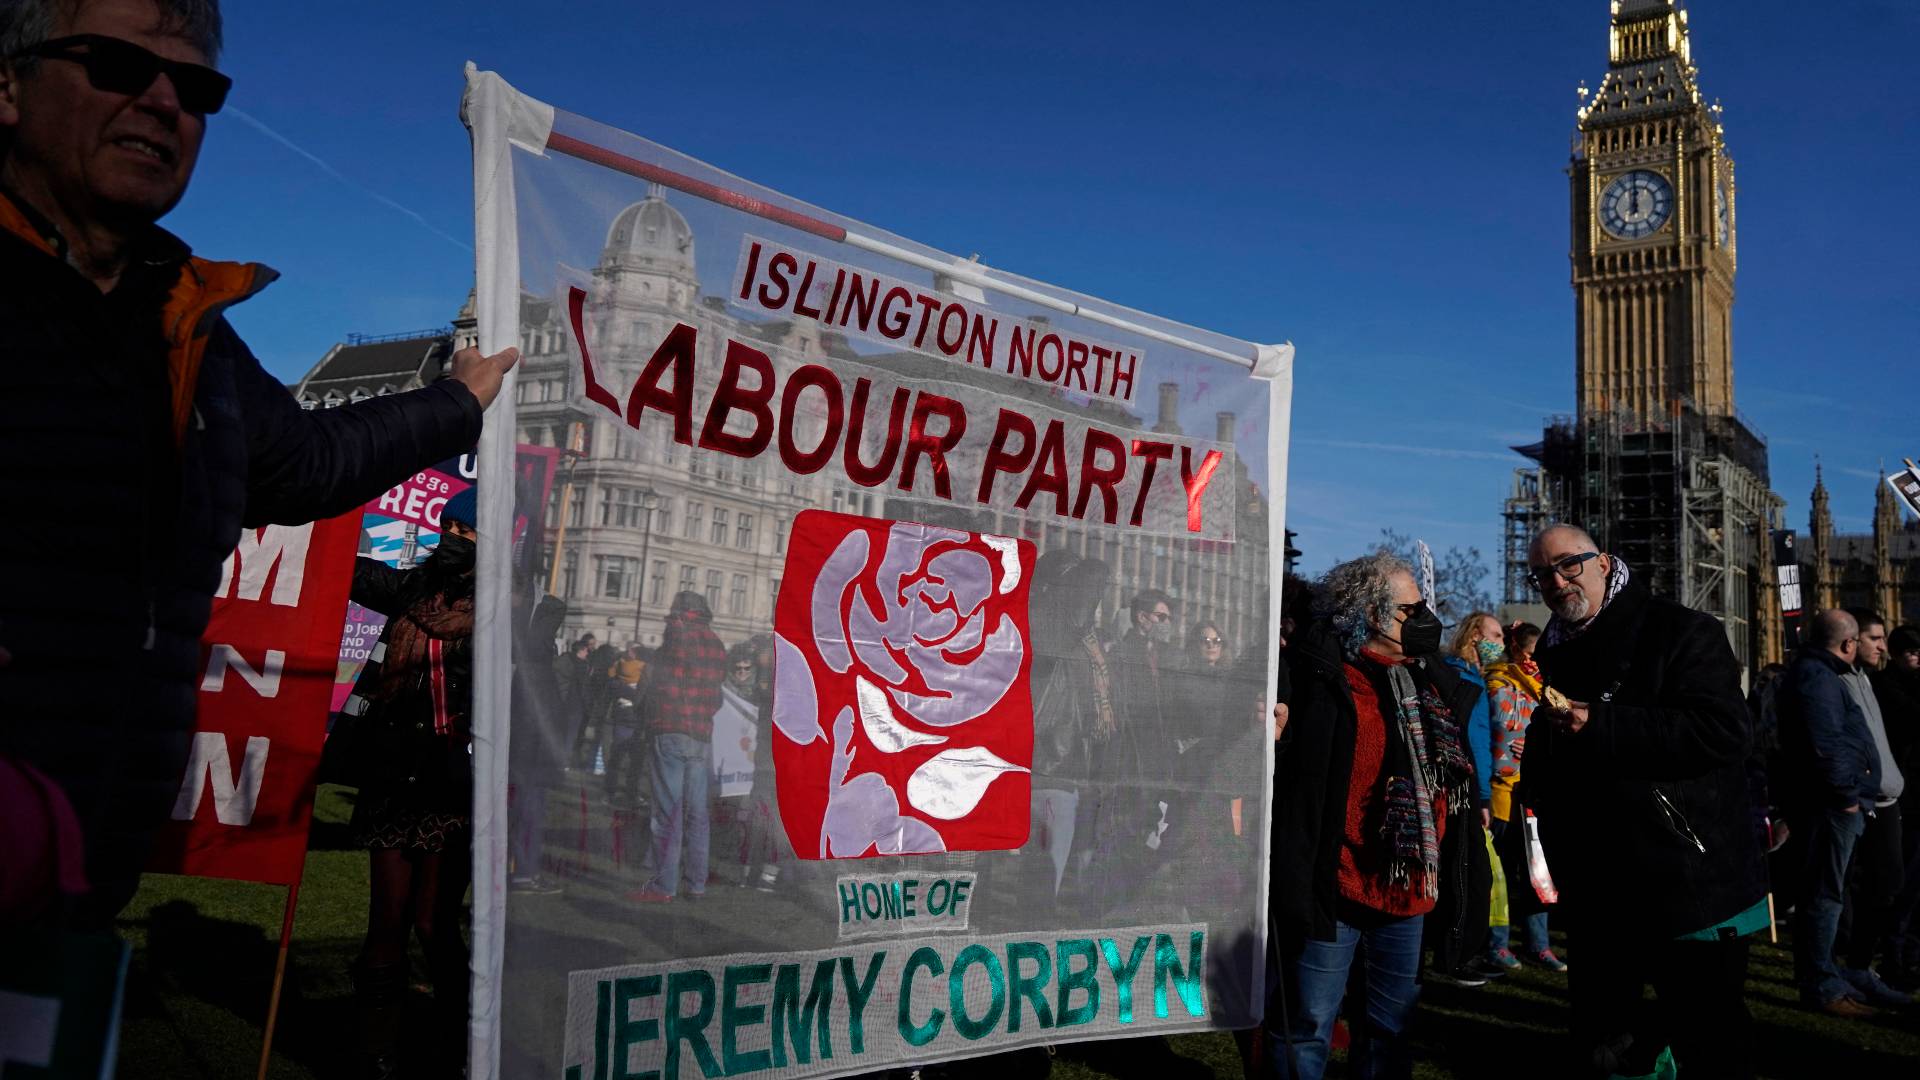 Supporters of former Labour party leader Jeremy Corbyn join demonstrators in Parliament Square at a protest organised by The People's Assembly to demand action to tackle the cost of living crisis in London on February 12, 2022